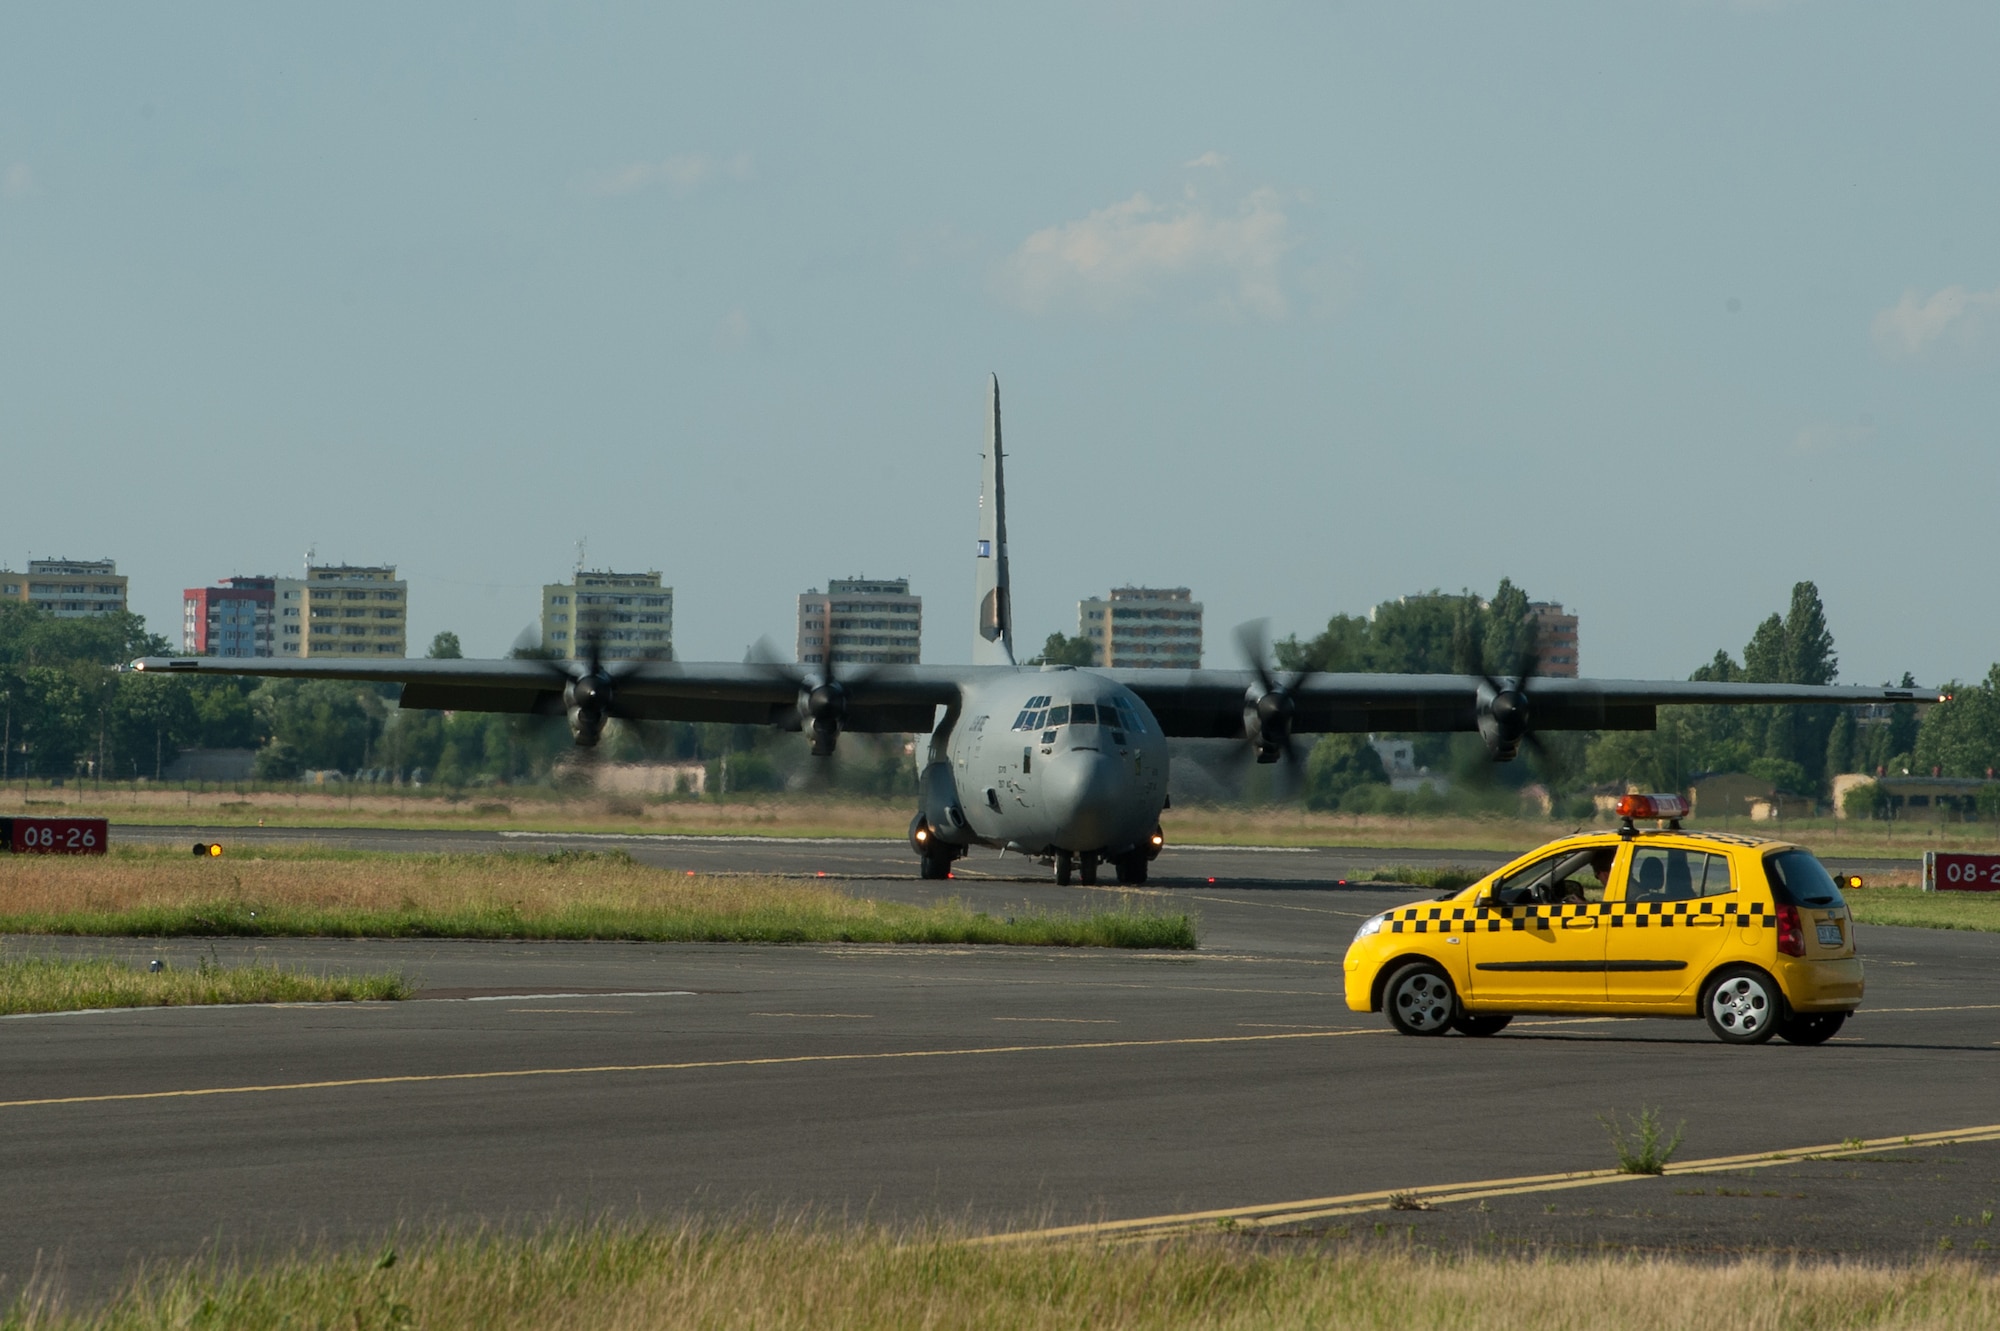 A C-130J Super Hercules from Dyess Air Force Base, Texas, taxies after landing at Bydgoszcz Airport, Poland, during exercise Swift Response 16 on June 8, 2016. The exercise is one of the premier military crisis response training events for multinational airborne forces in the world. This year, it had more than 5,000 participants from 10 NATO nations. (U.S. Air Force photo/Master Sgt. Joseph Swafford)